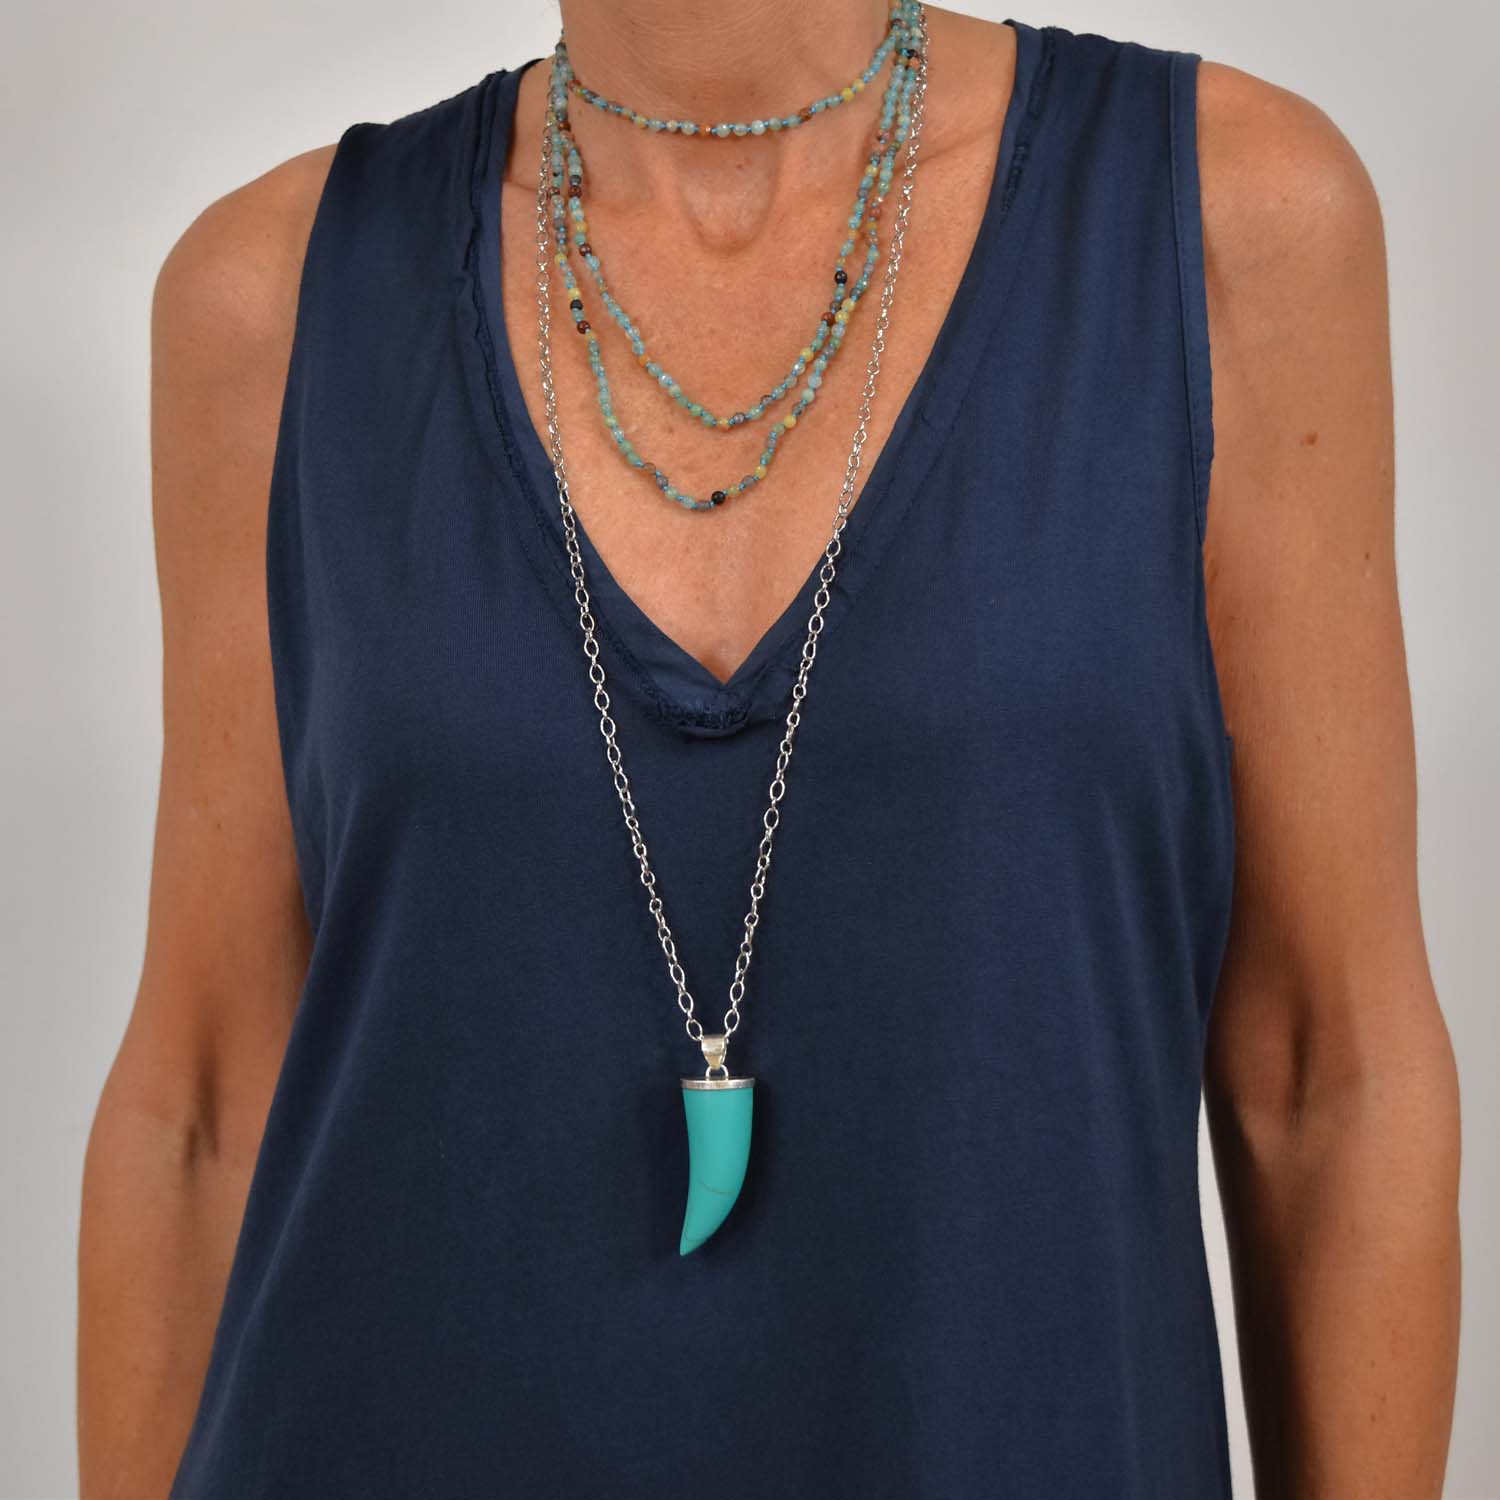 Turquoise horn necklace